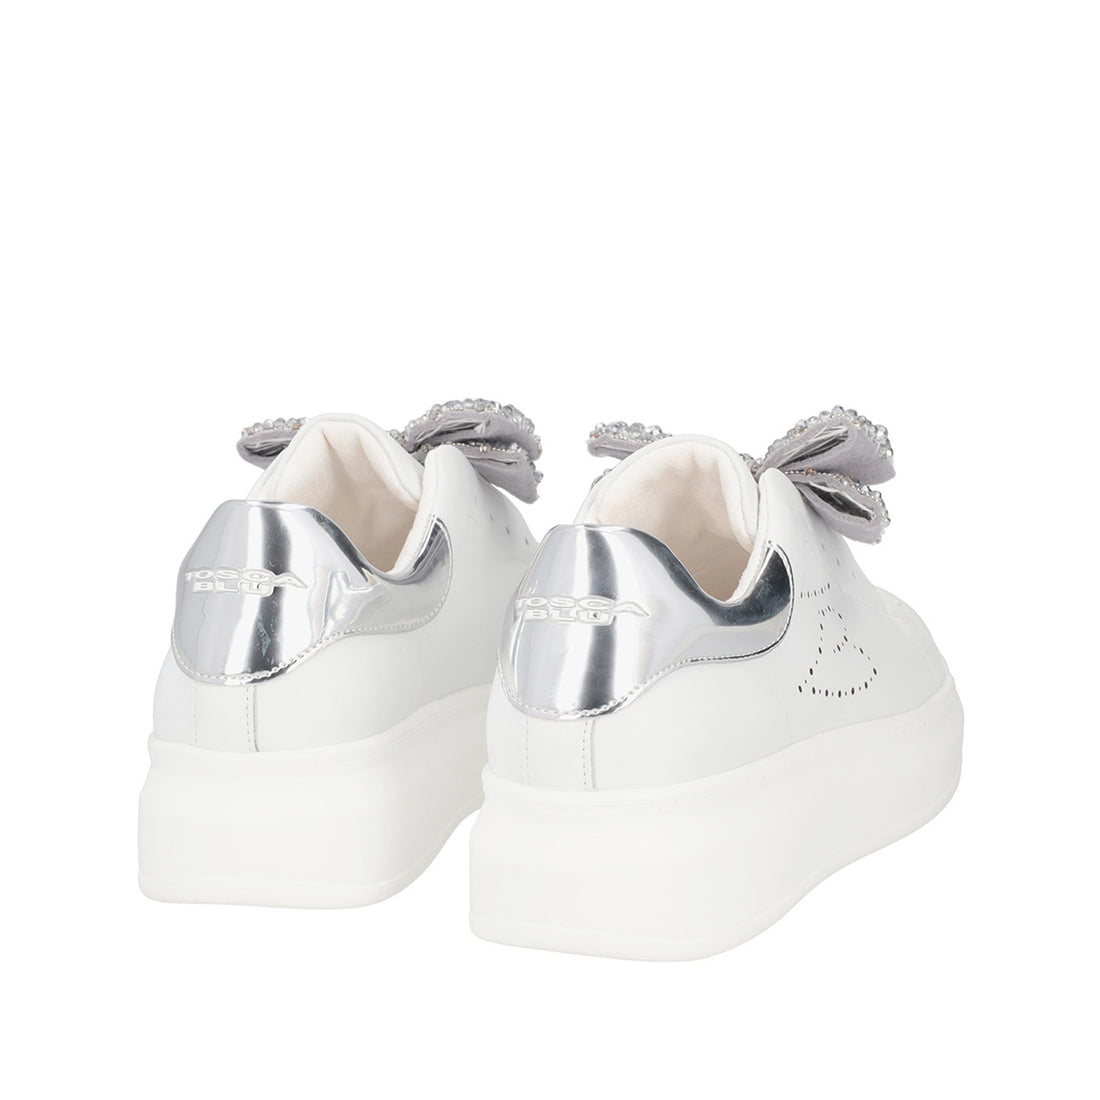 WHITE/SILVER GLAMOUR SNEAKER WITH RHINESTONE BOW